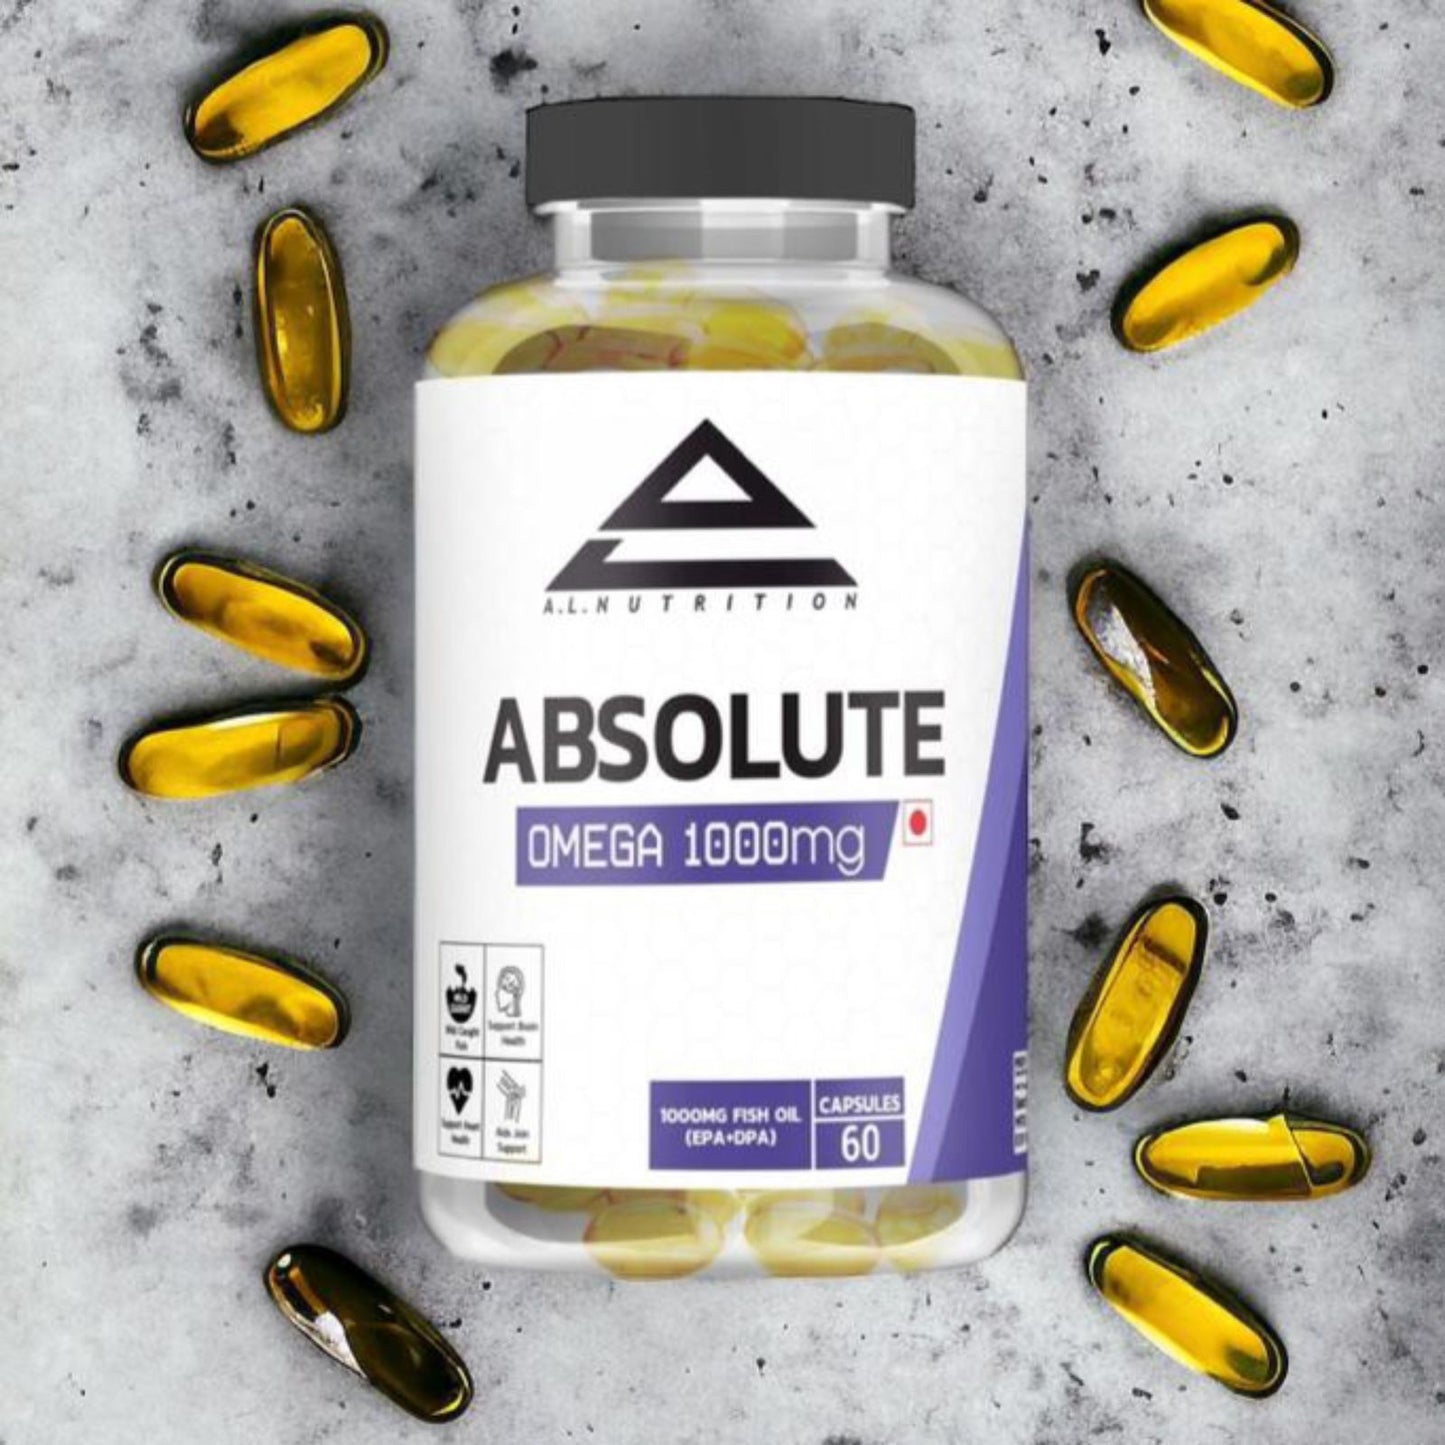 ABSOLUTE OMEGA-FISH OIL